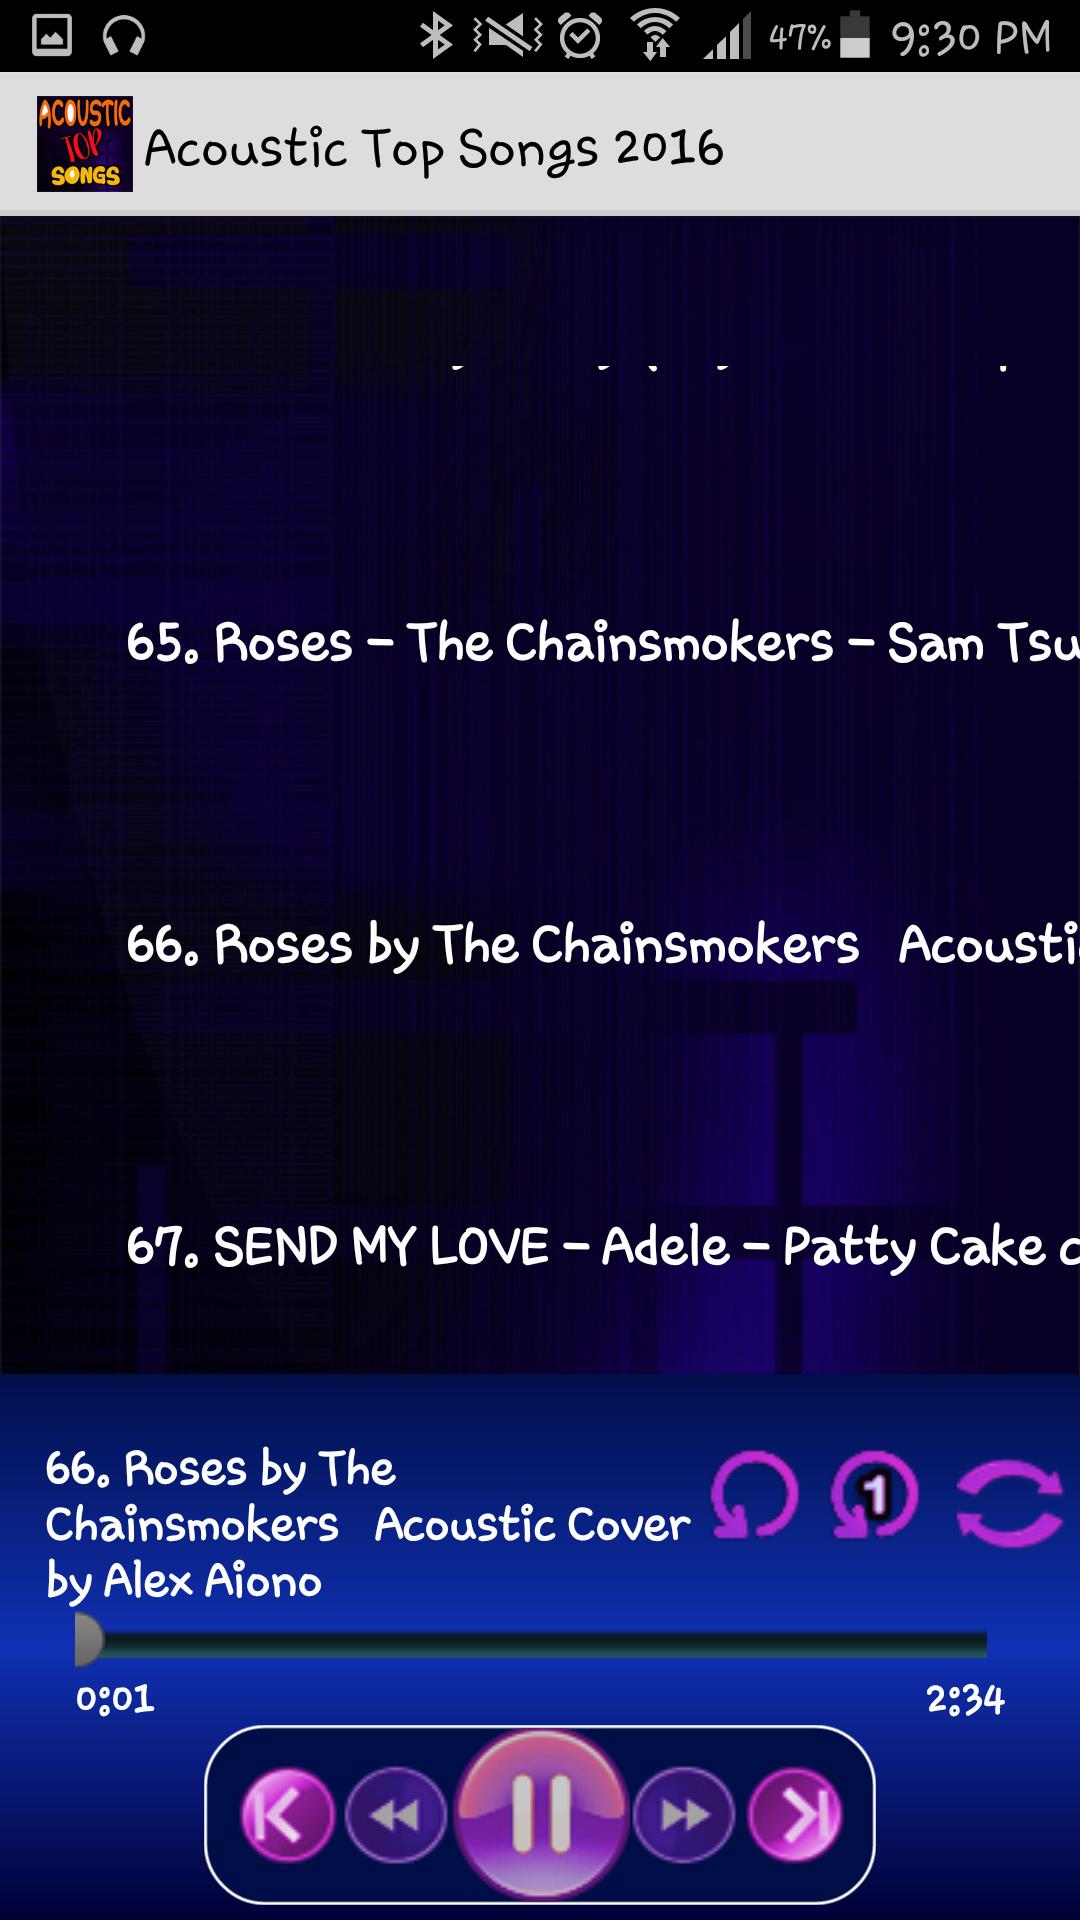 Top 100 Songs Acoustic 2016 for Android - APK Download